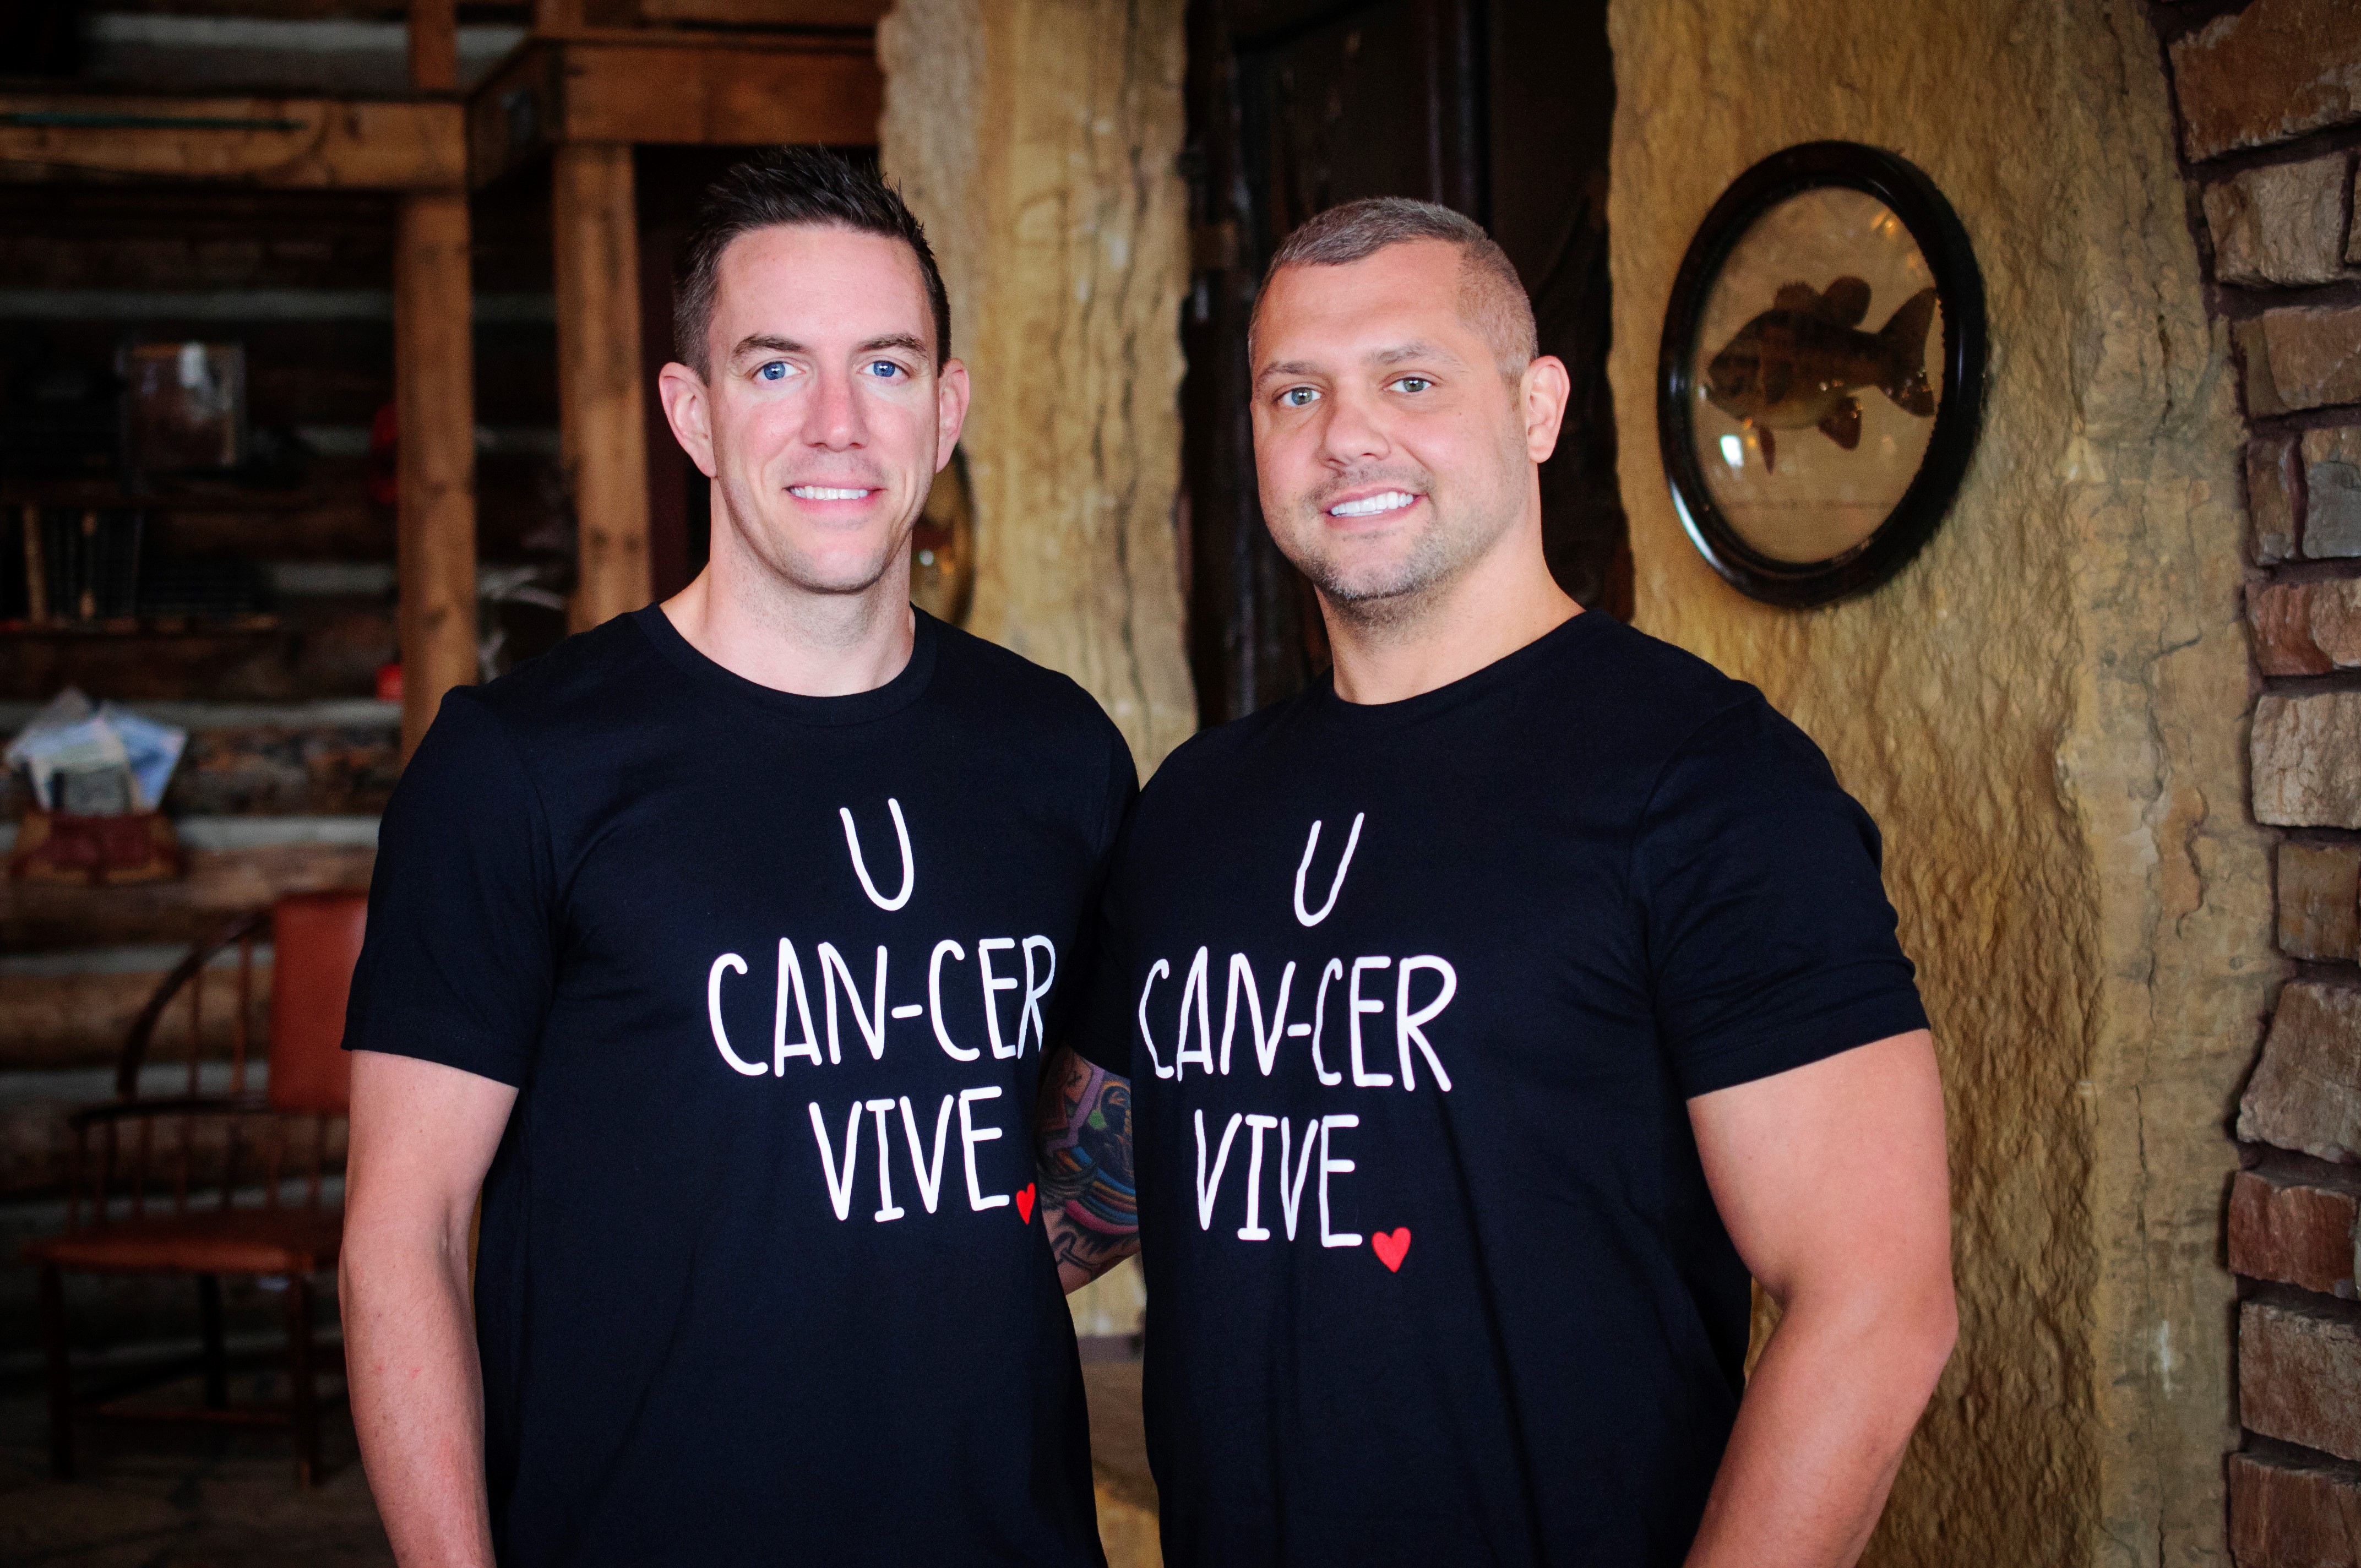 Mike and Rob wearing U CAN-CER VIVE t-shirts supporting Who's Your Bartender?